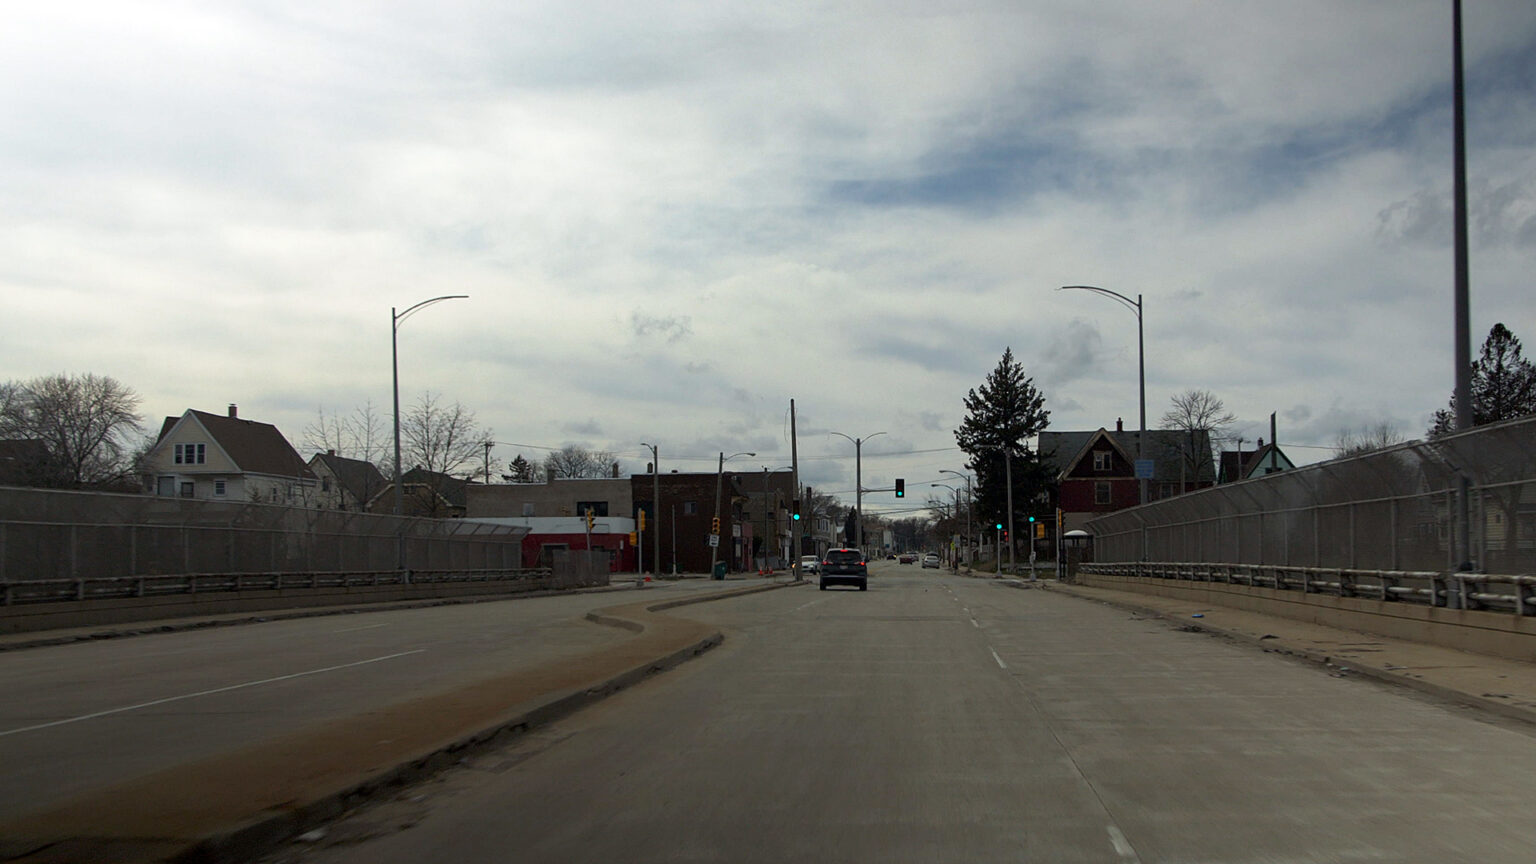 A perspective from the front window of a vehicle shows a divided street on a bridge, with other vehicles, street lights, trees and buildings in the background.